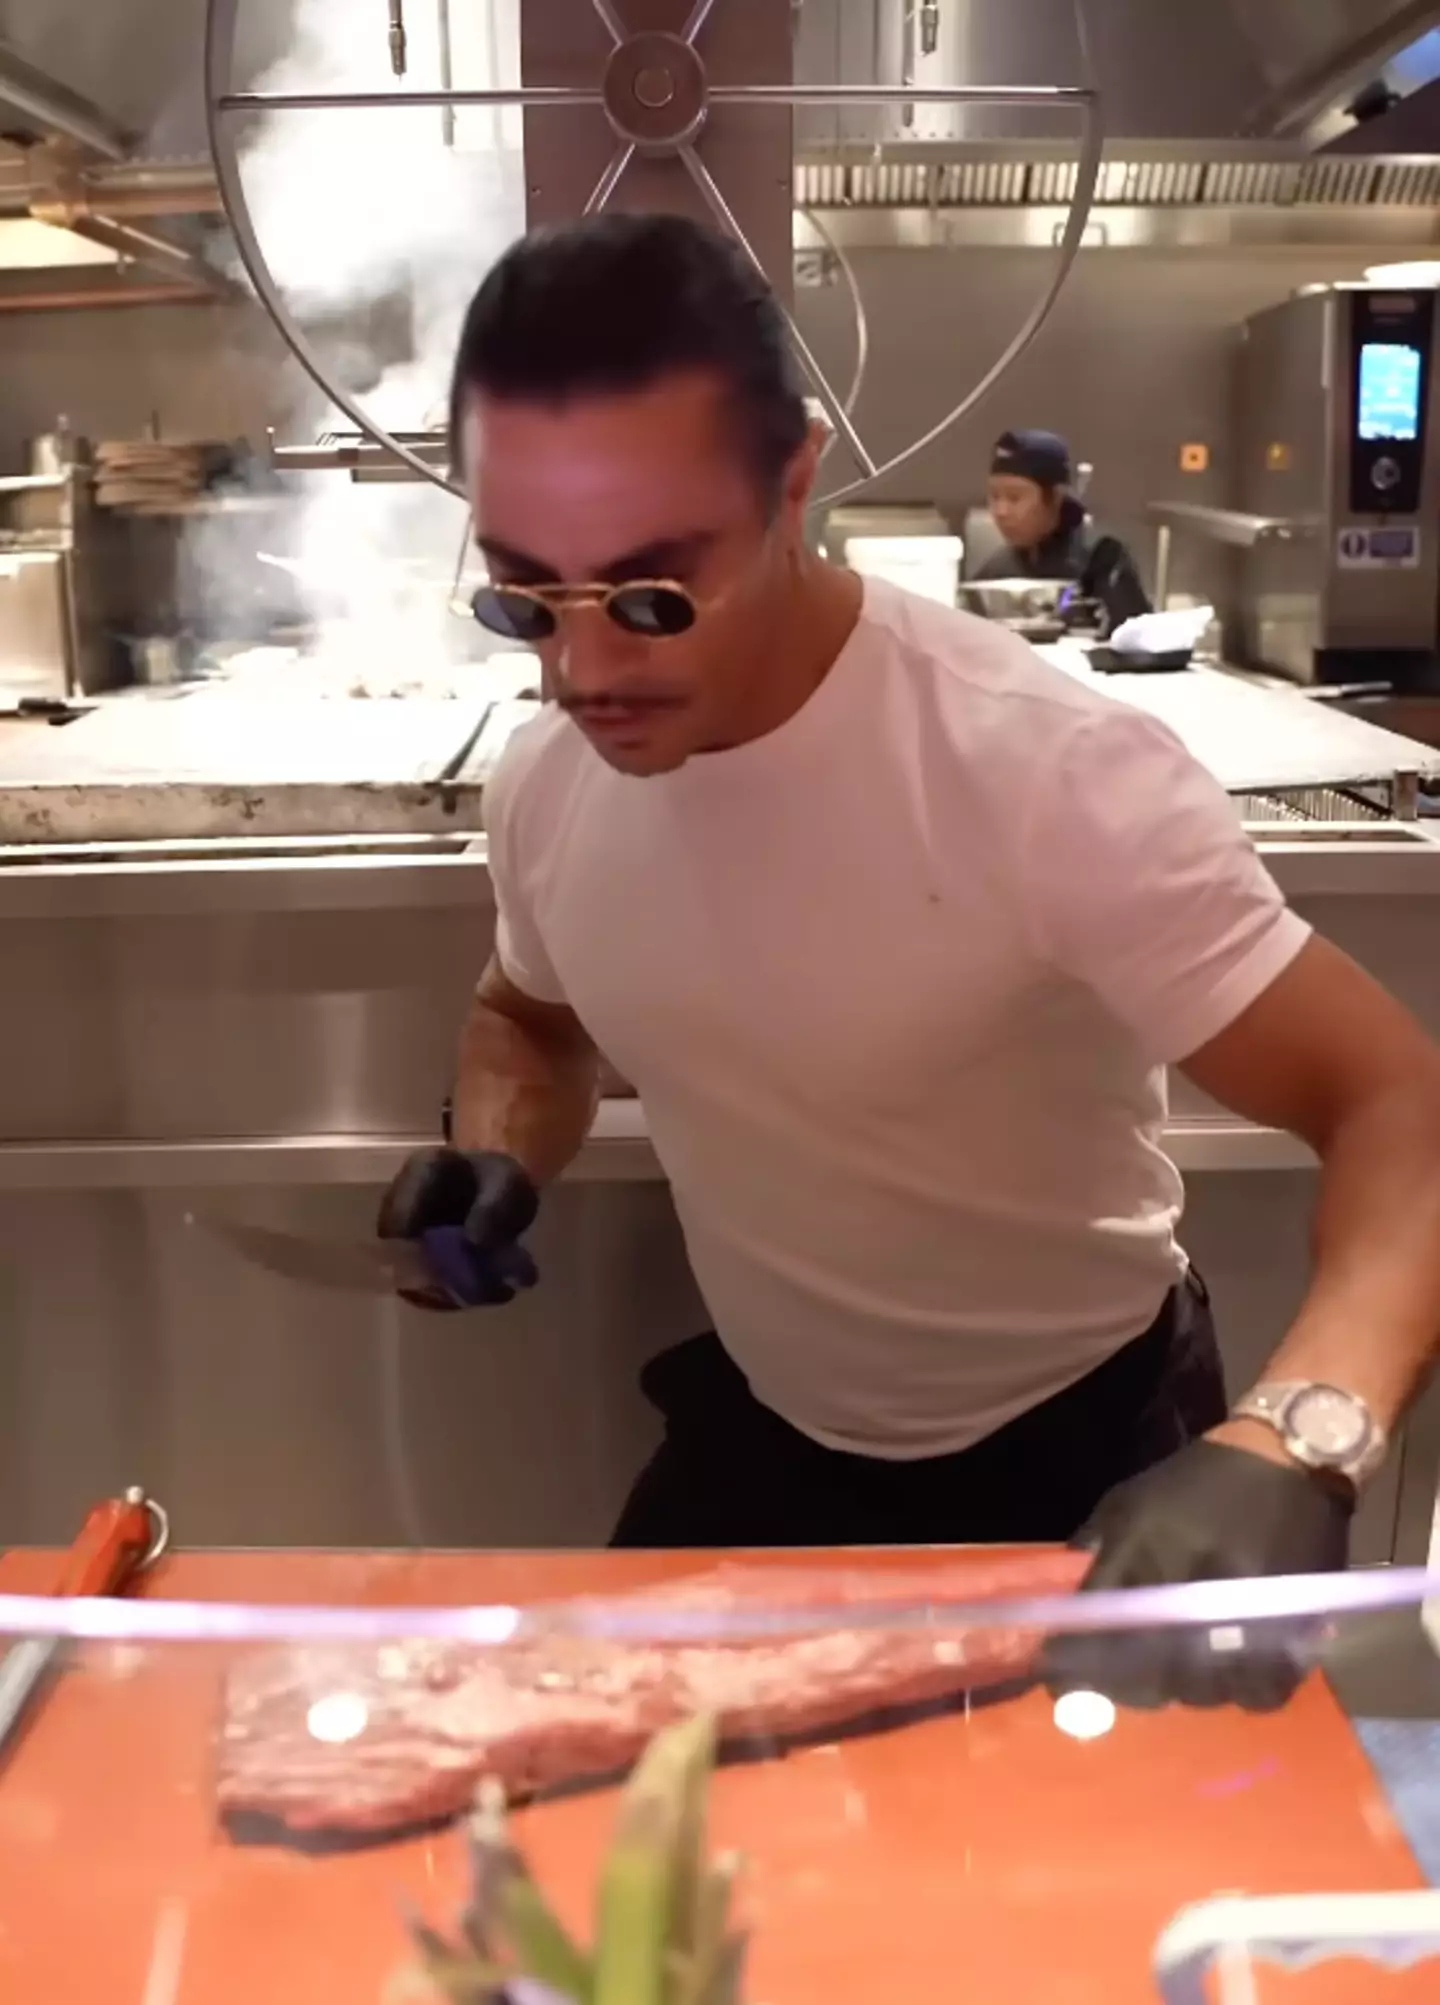 Salt Bae began working as a butcher at 12 years old.